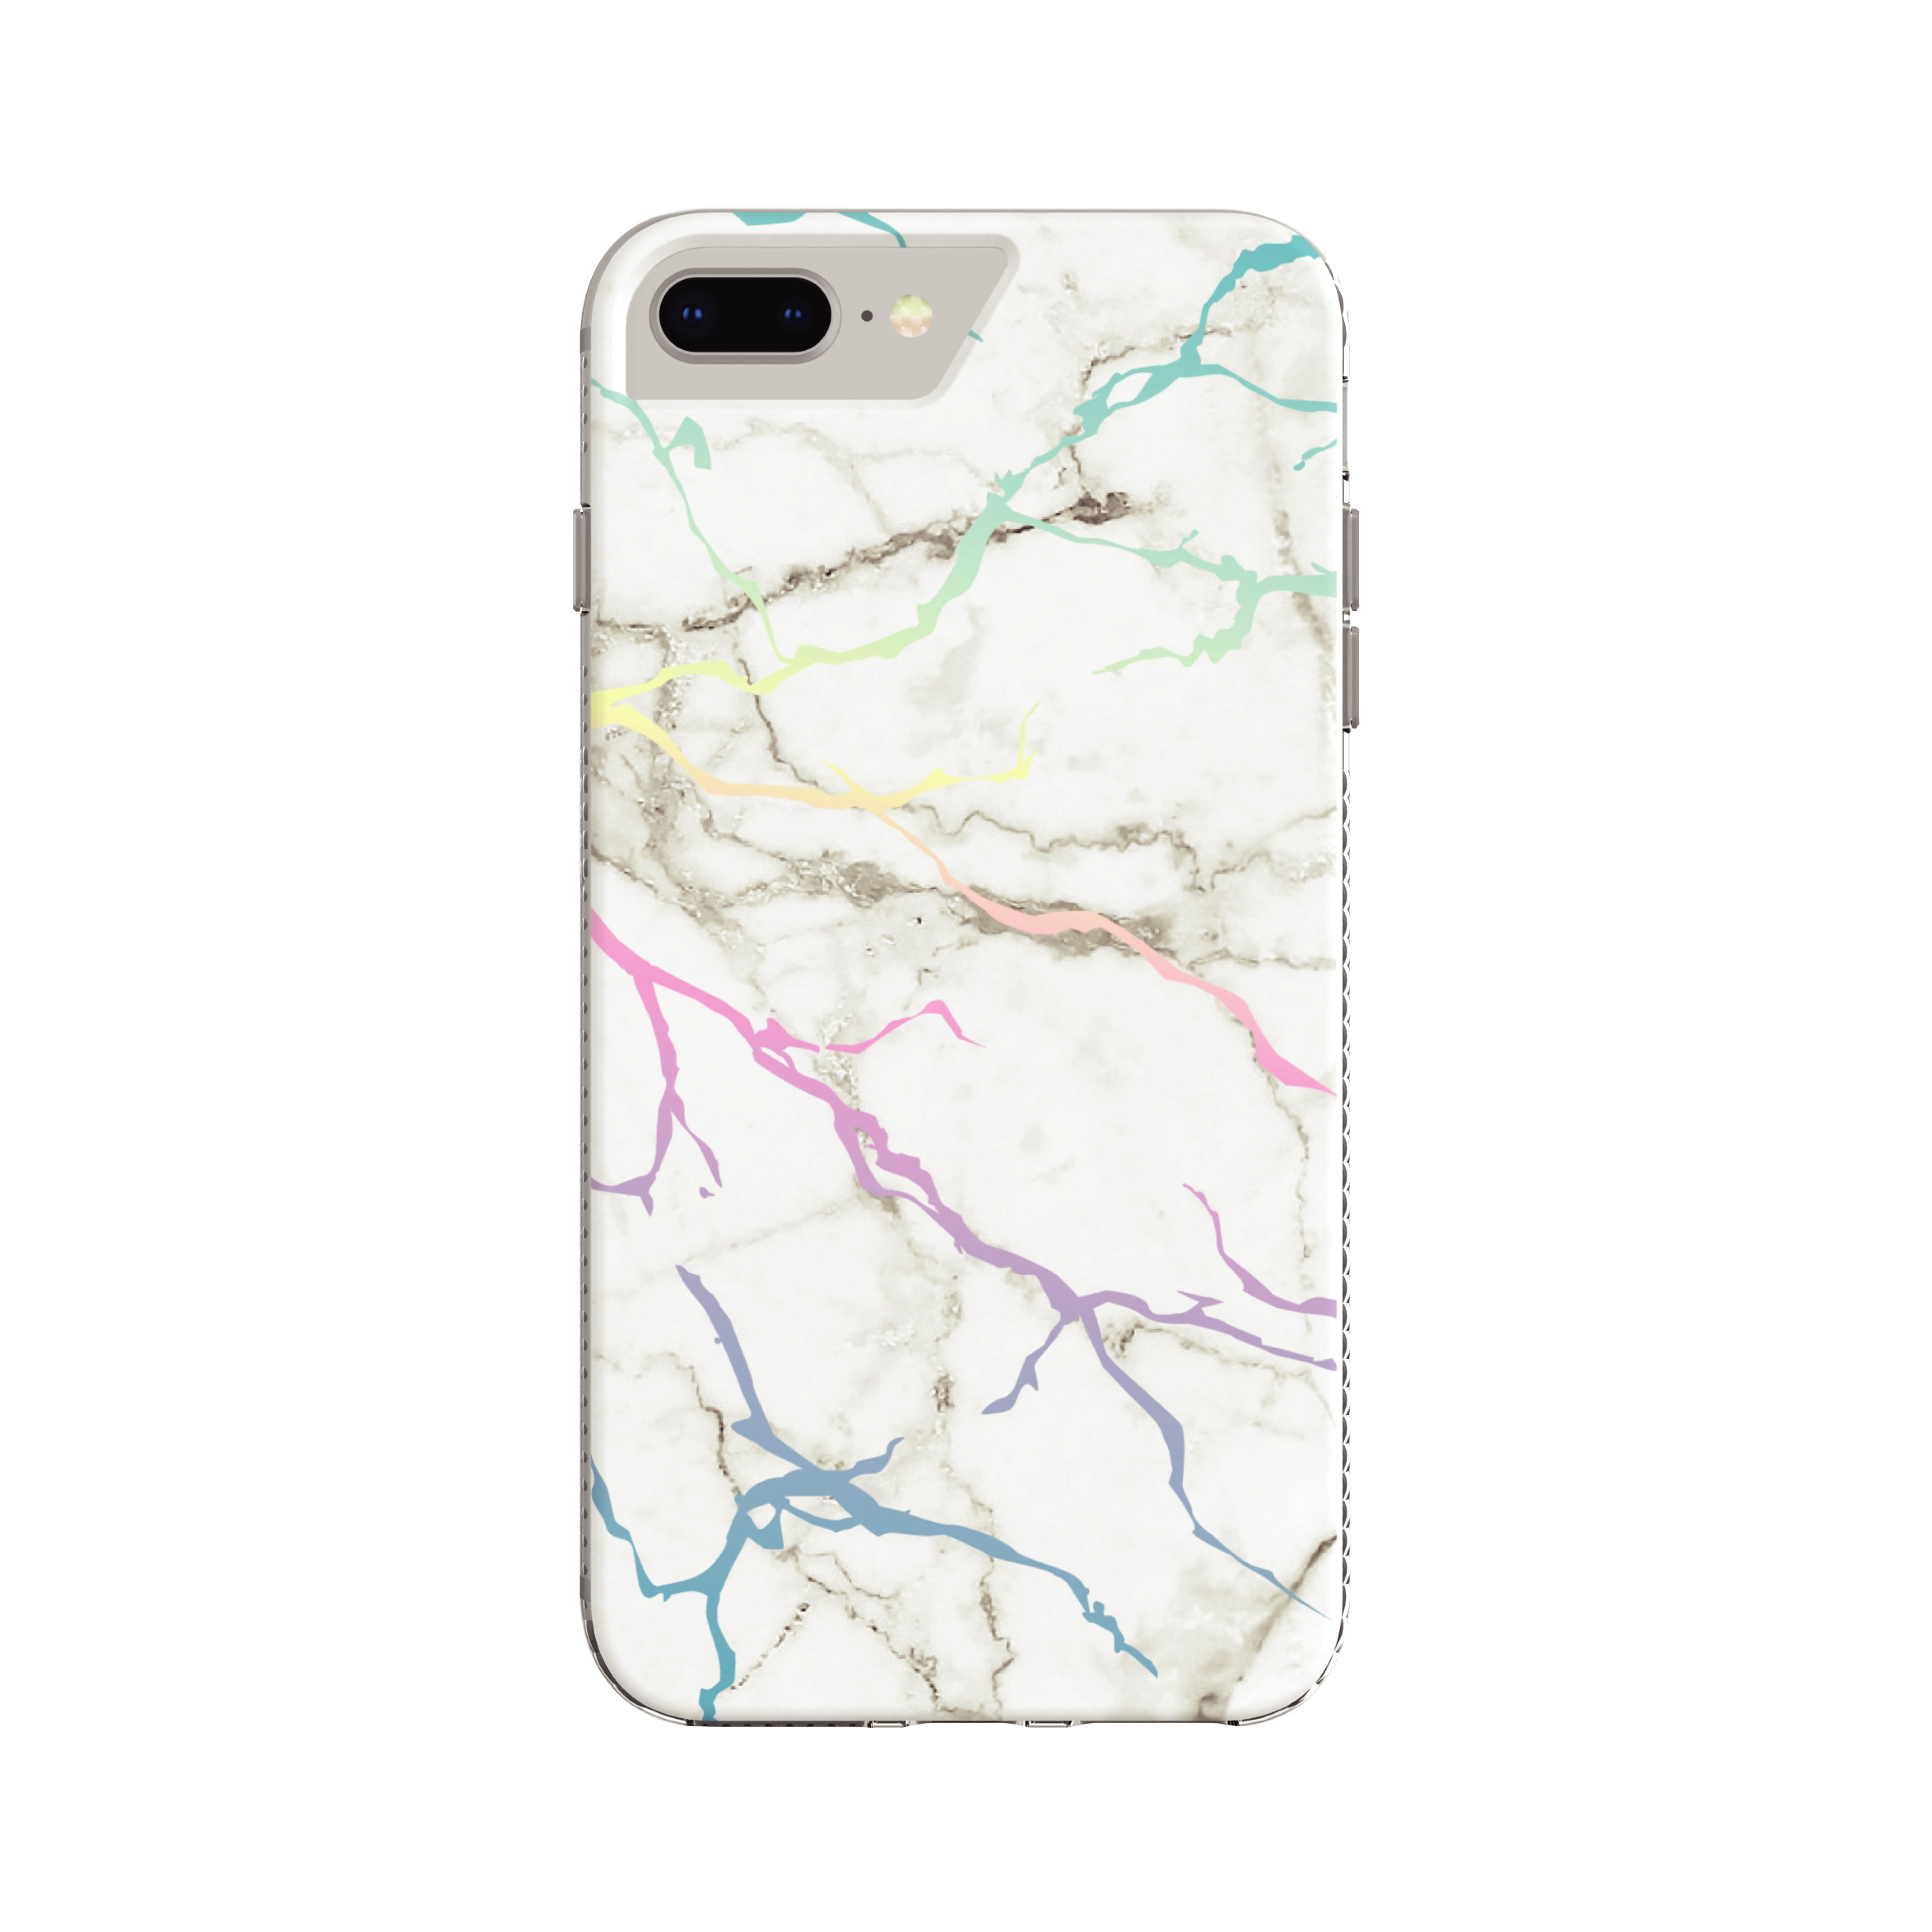 iPhone 7 Plus Abstract iPhone Case iPhone Case Black Marble iPhone SE Black Marble Phone Case Black Marble iPhone 7 Case iPhone 6 Case